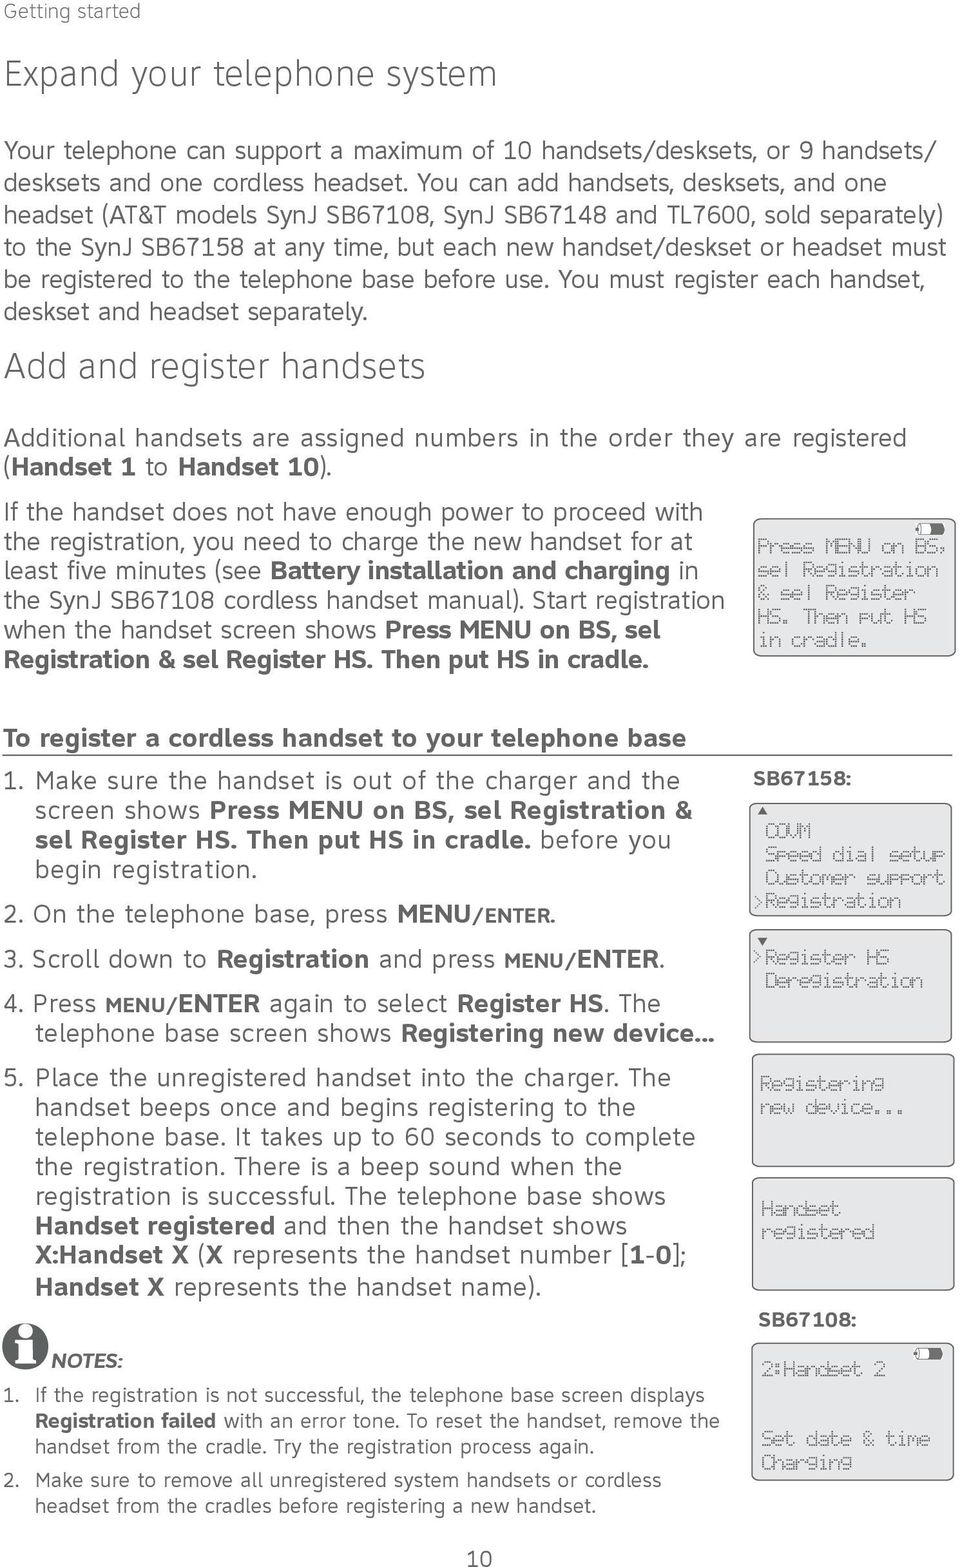 registered to the telephone base before use. You must register each handset, deskset and headset separately.